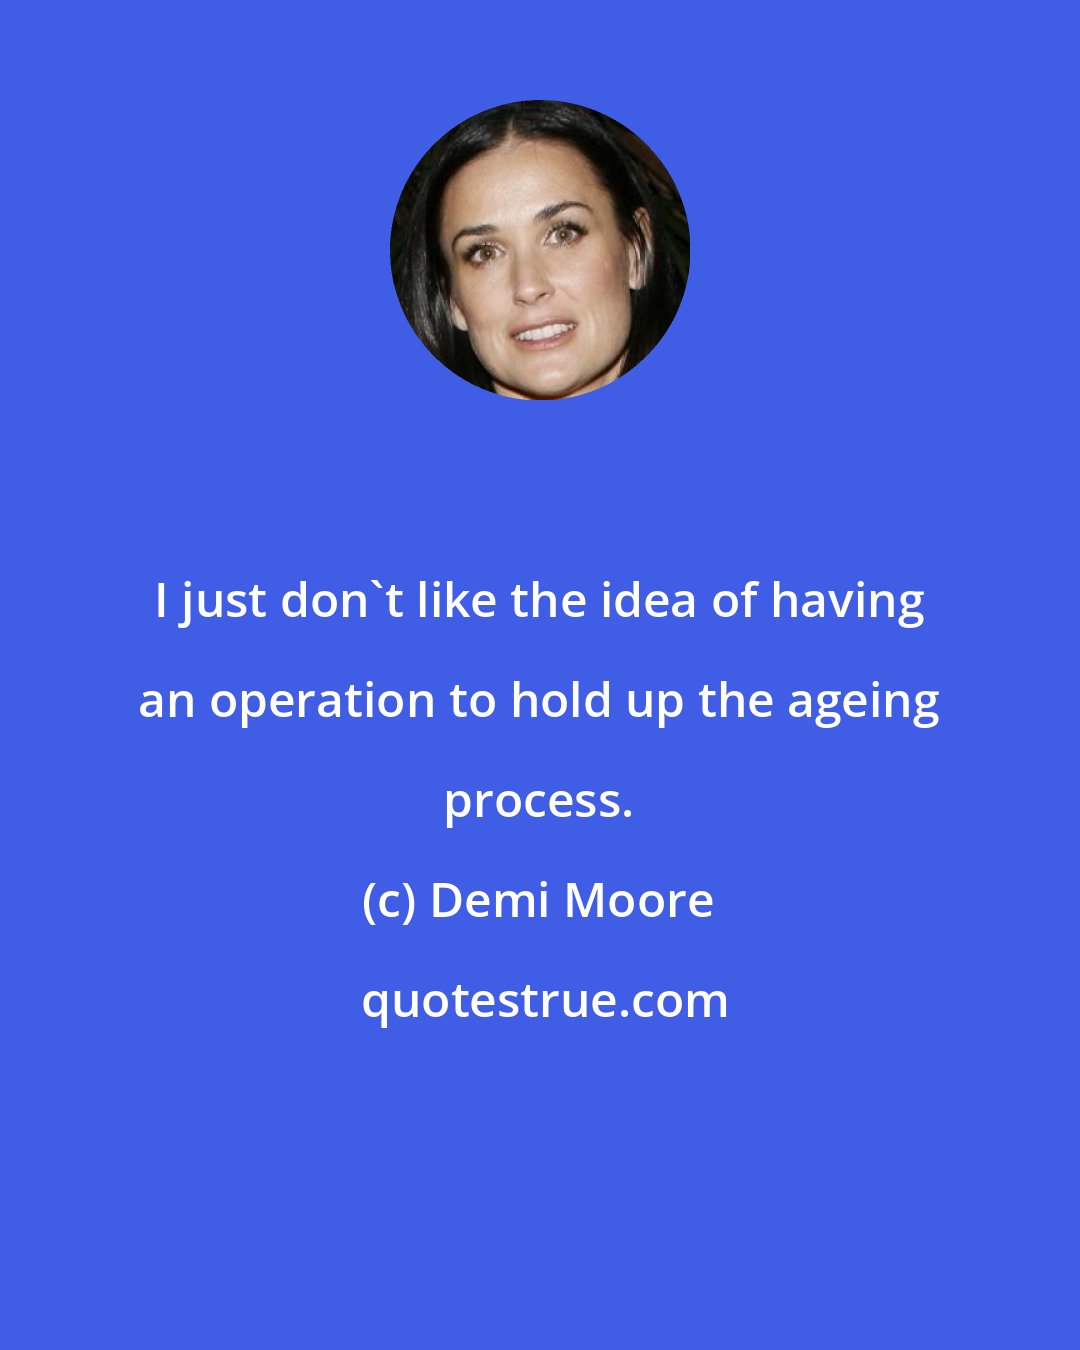 Demi Moore: I just don't like the idea of having an operation to hold up the ageing process.